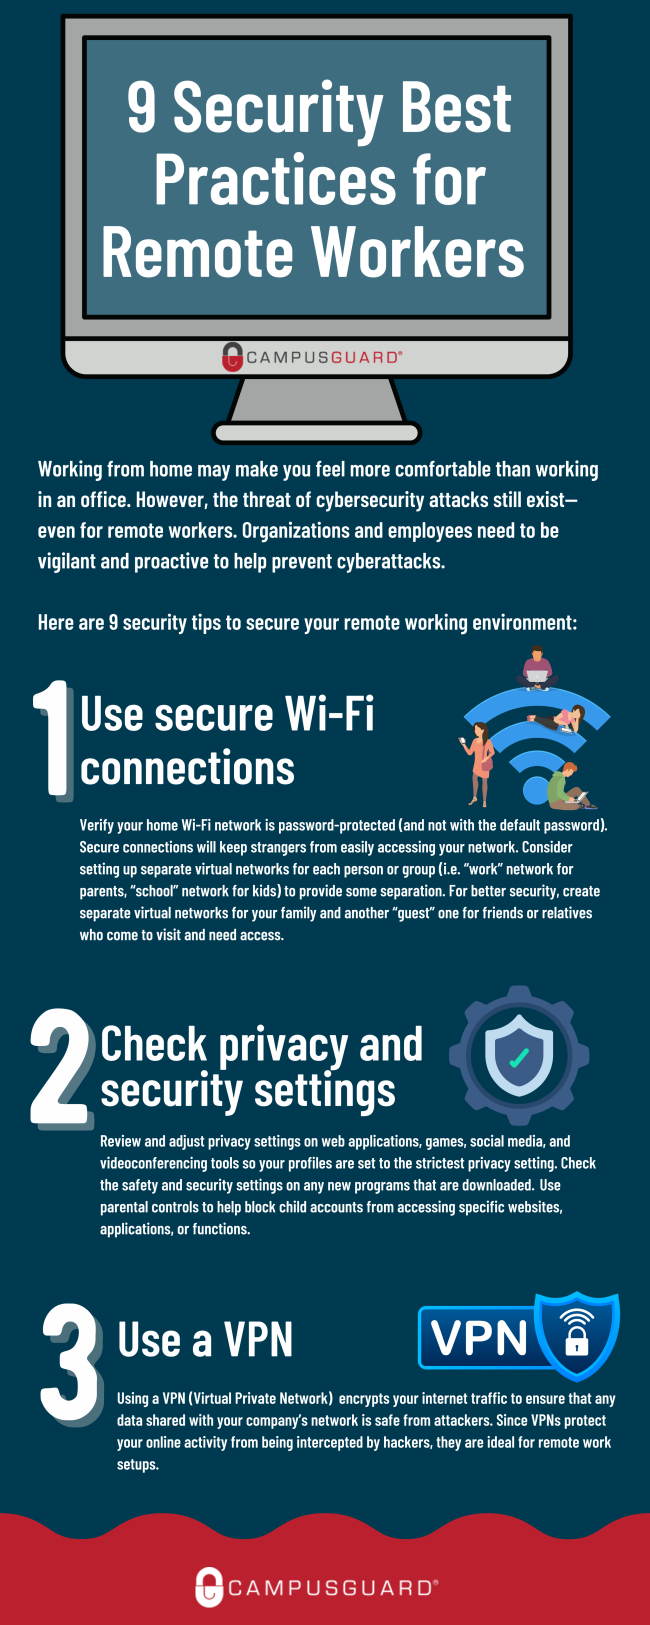 9 Security Best Practices for Remote Workers